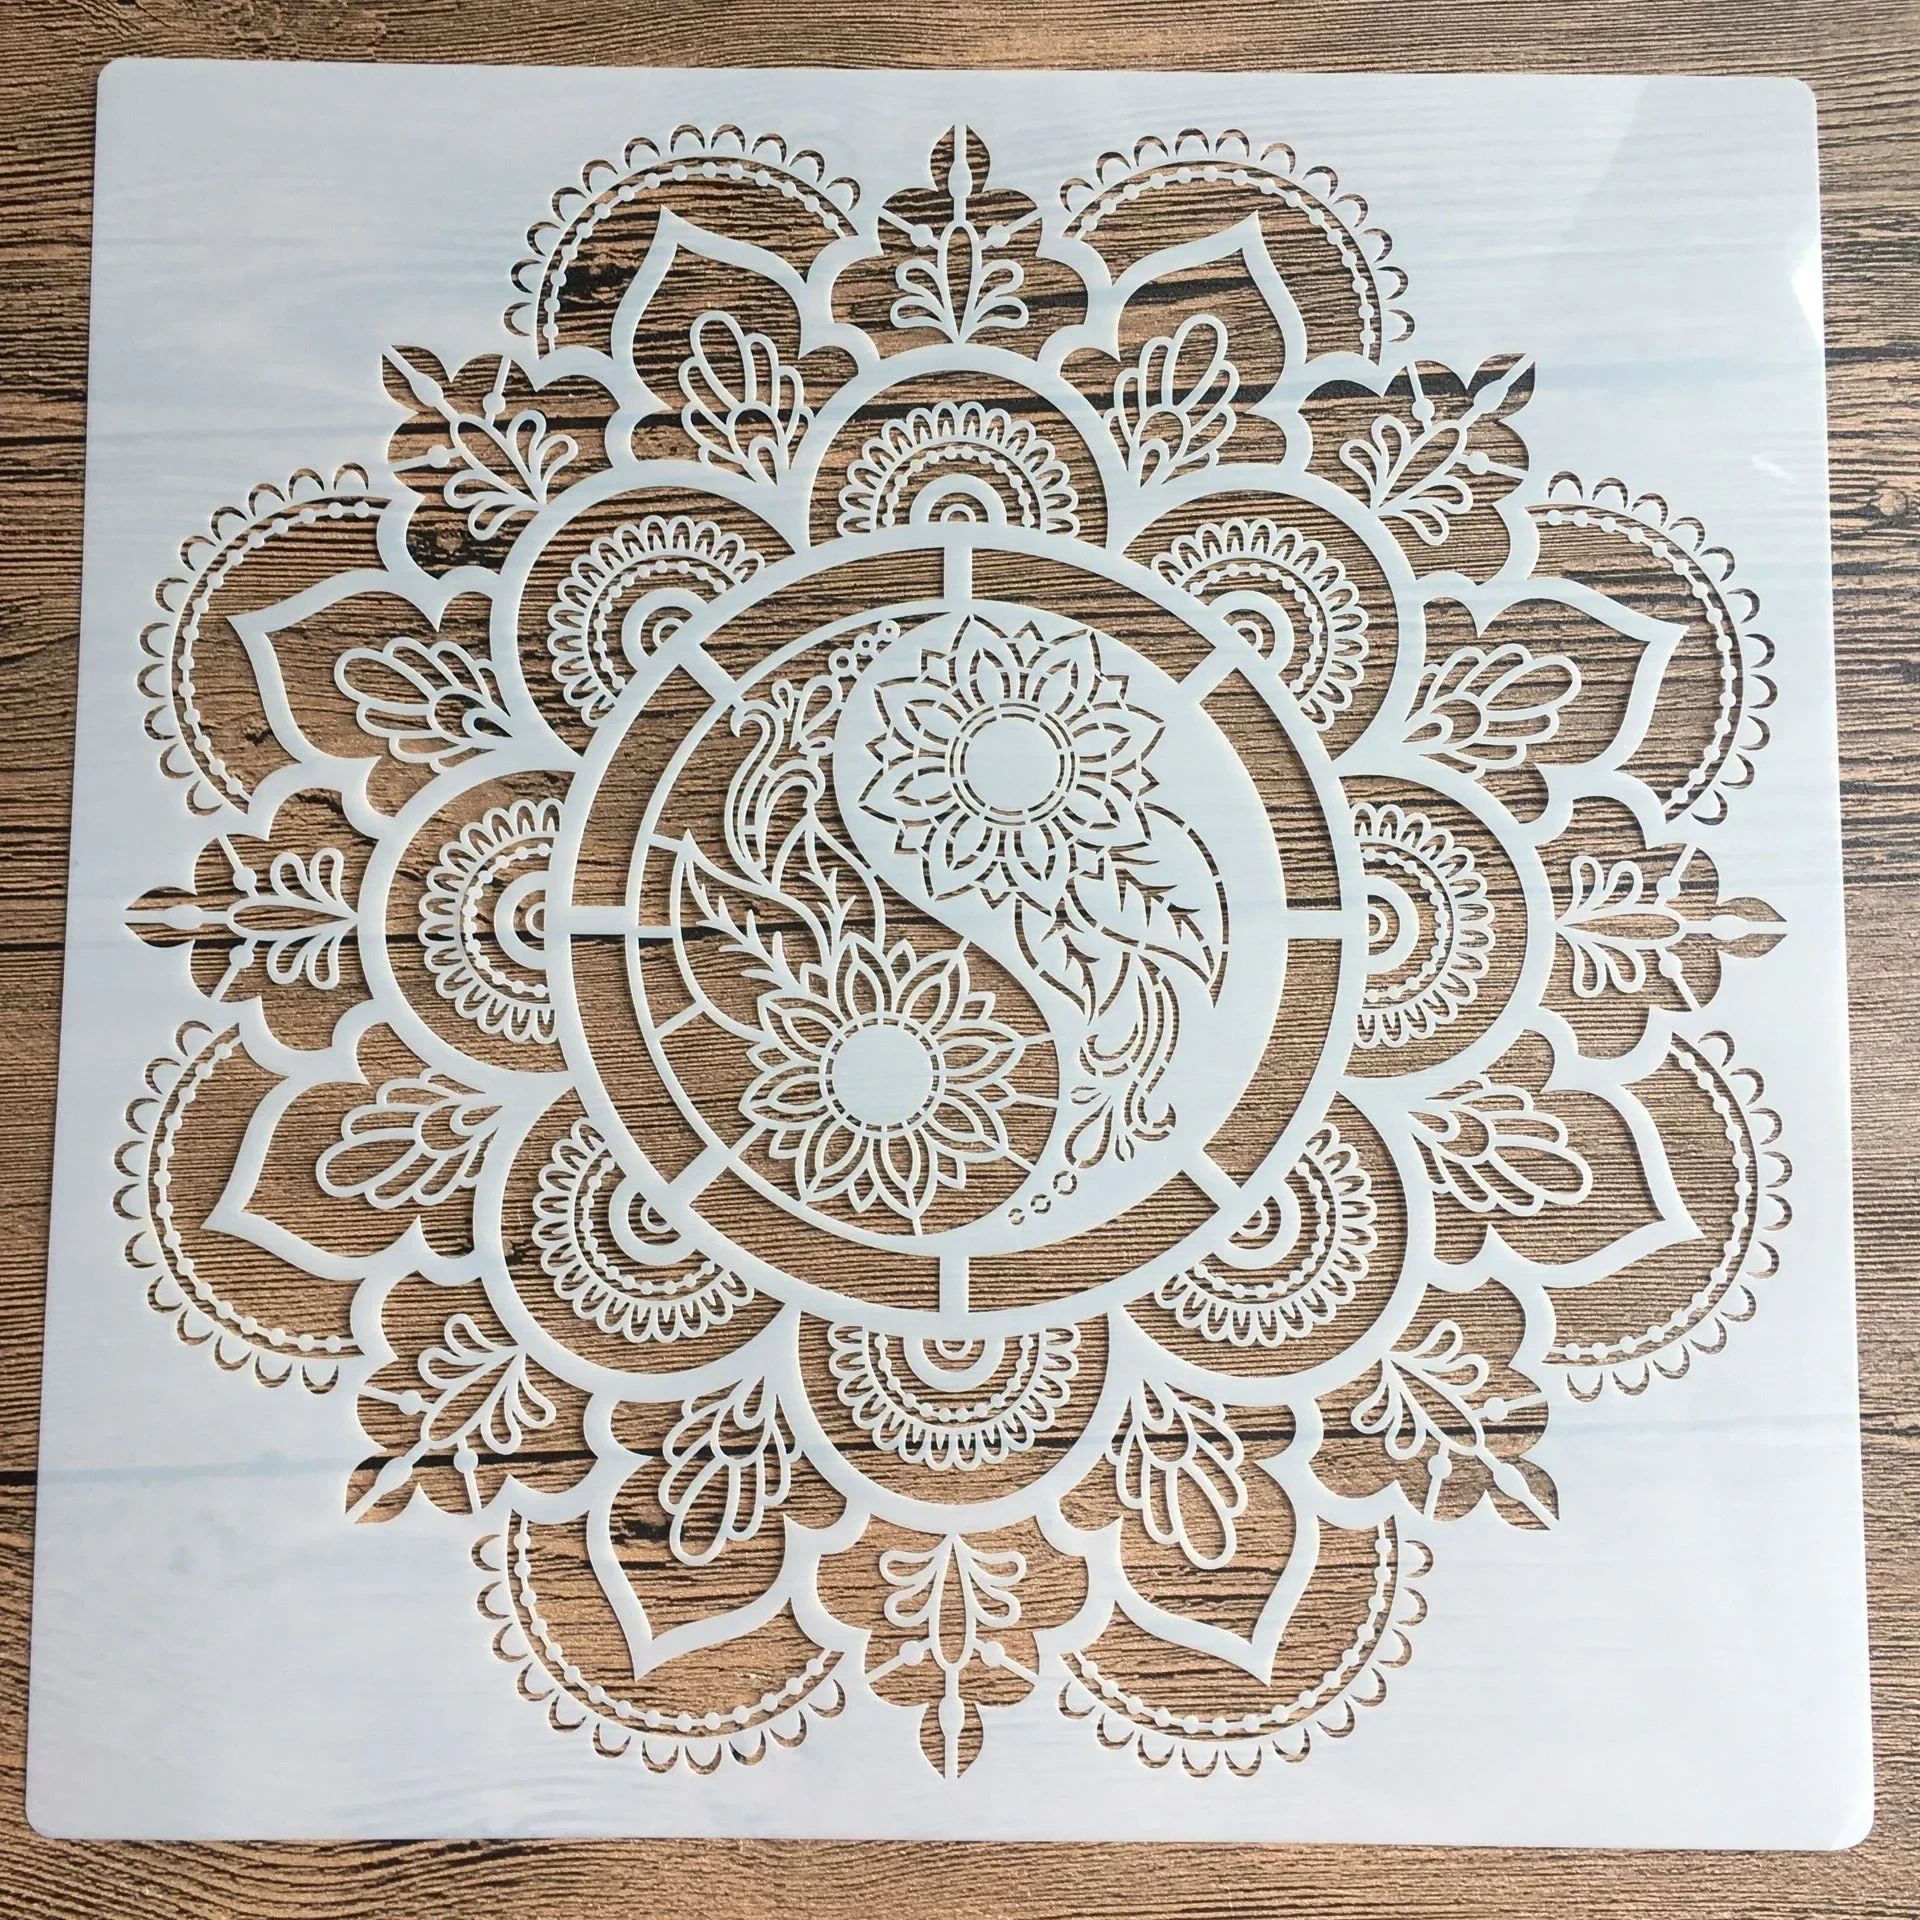 New 30 * 30cm size diy craft mandala mold for painting stencils stamped photo album embossed paper card on wood, fabric, wall